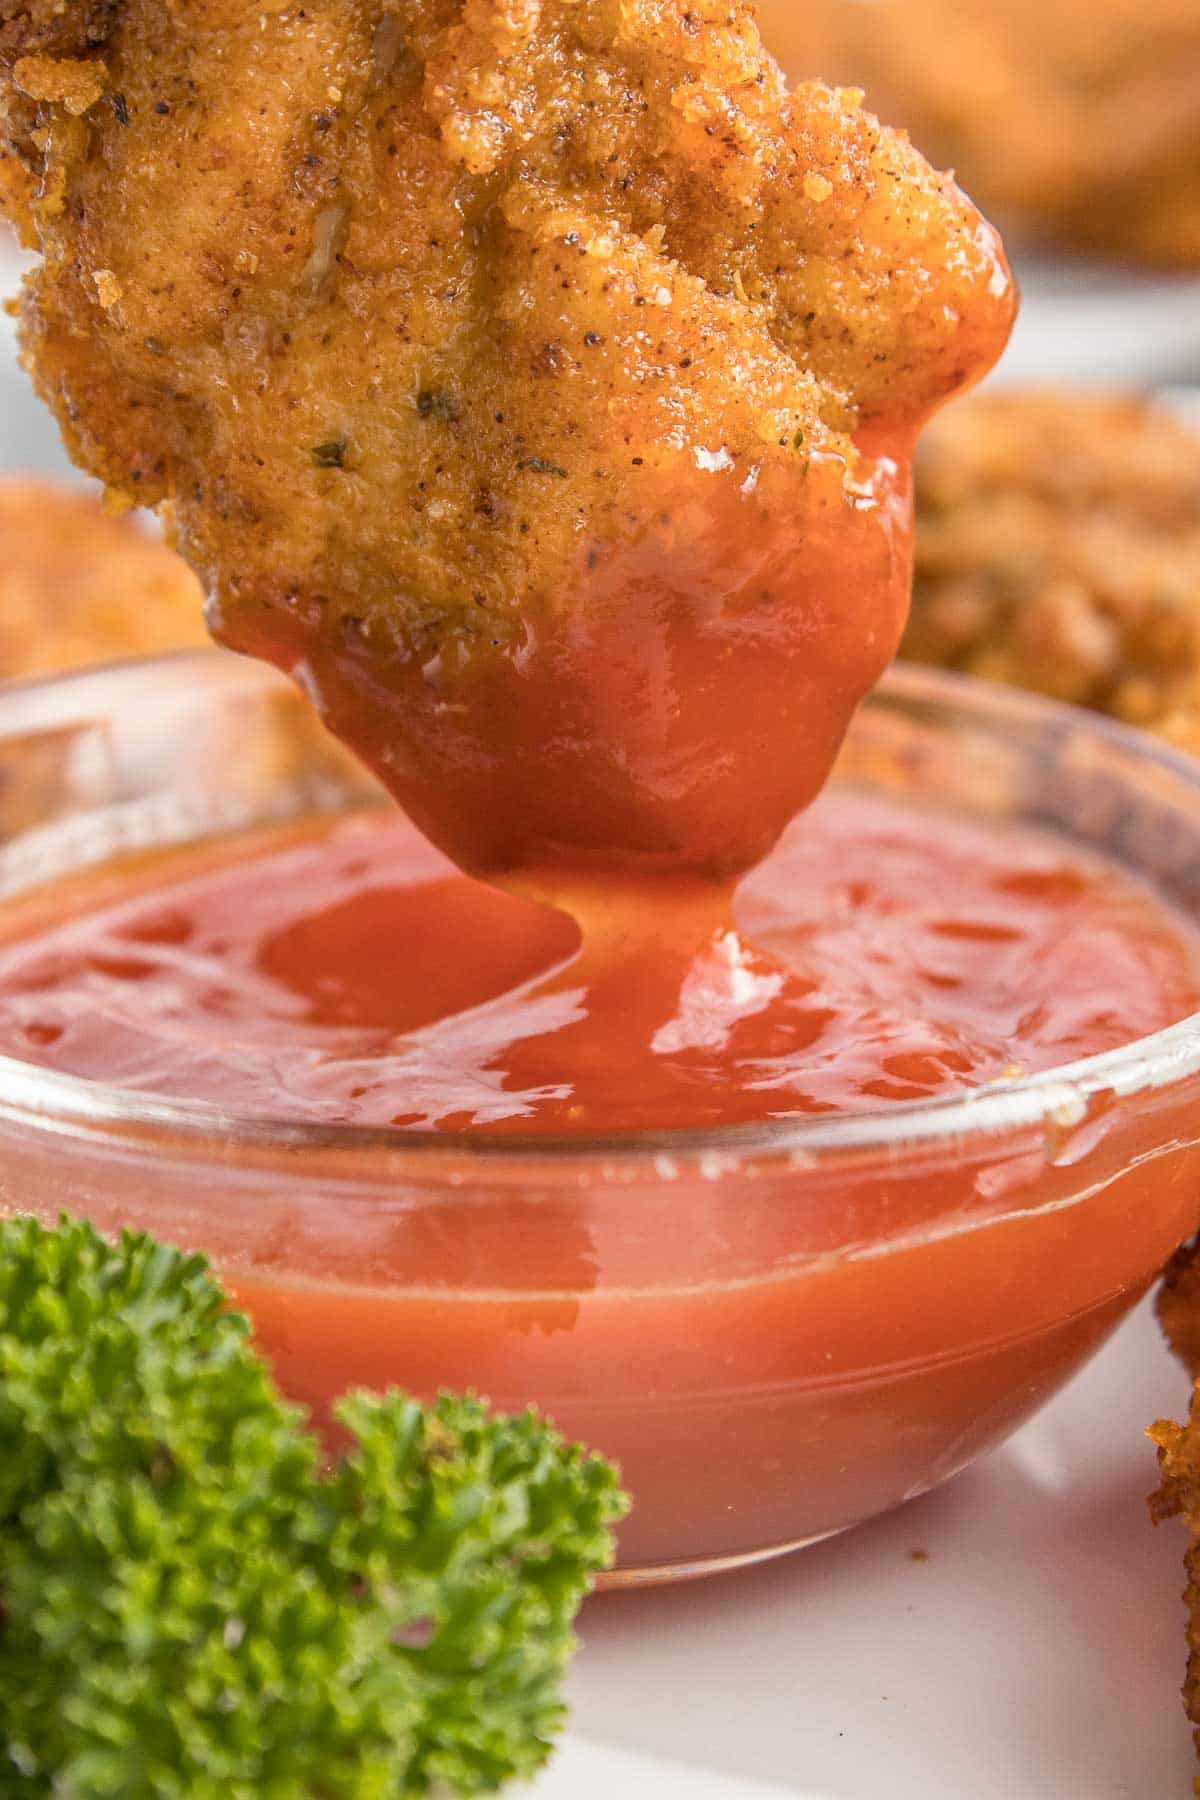 A chicken nugget being dipped into a small glass bowl of ketchup.